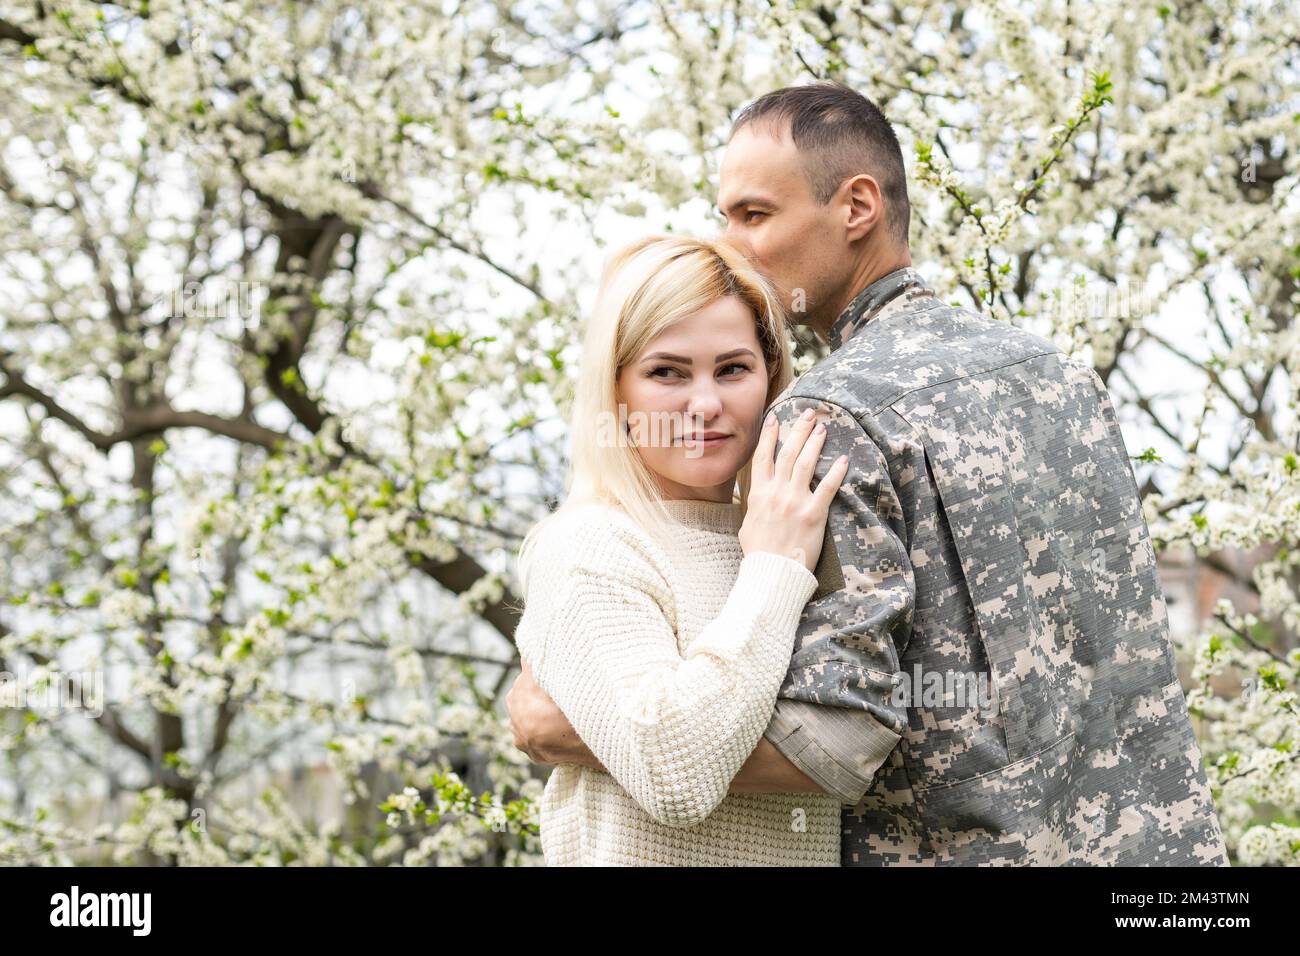 Soldier reunited with wife in park. Stock Photo